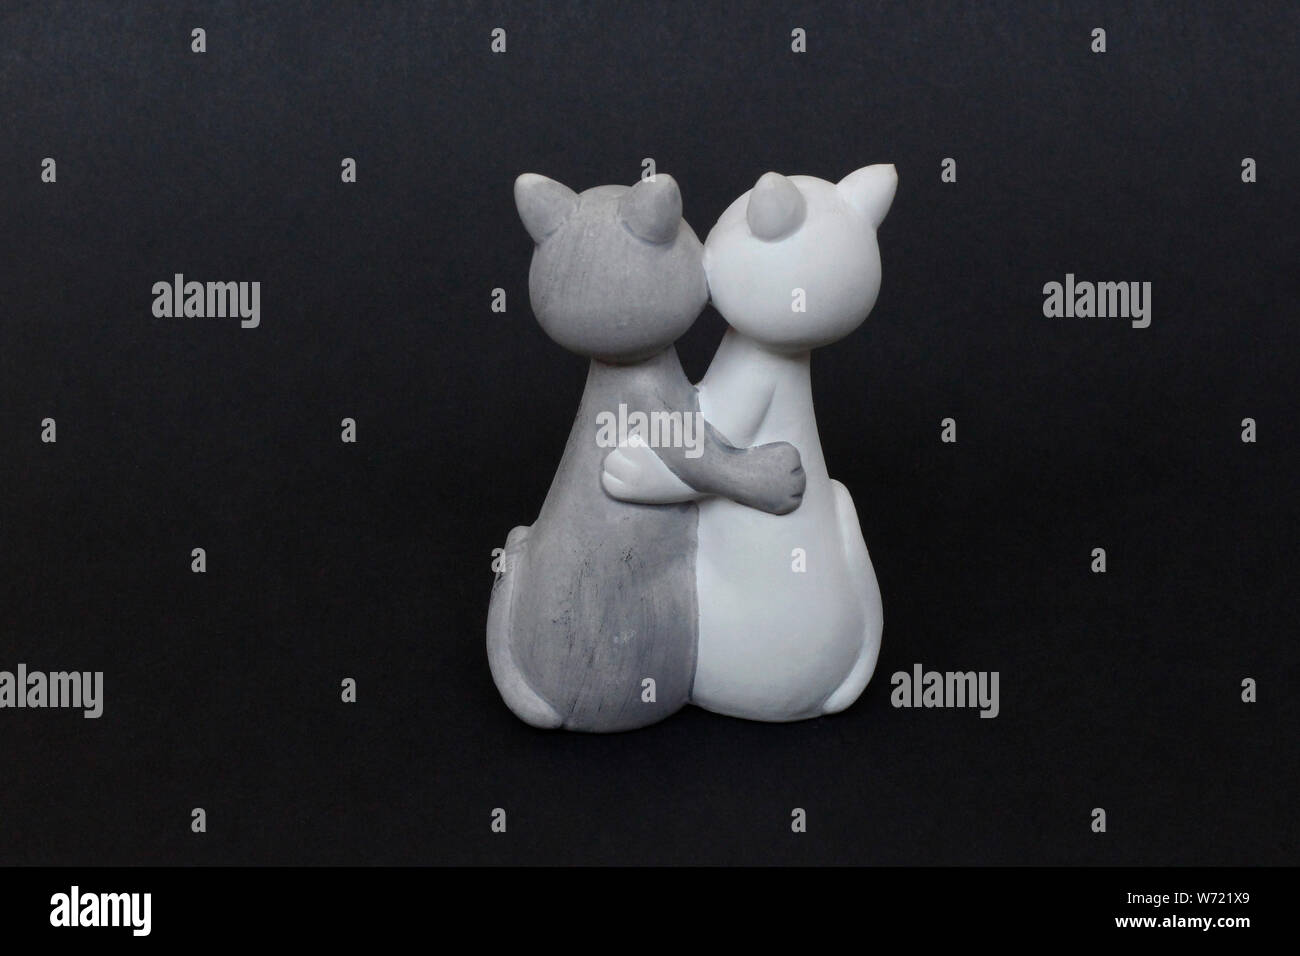 Love - hugging cats. Toy, figurine - white and gray cats are standing in an embrace. Black background. Together with a cat. Friendship and trust. Stock Photo